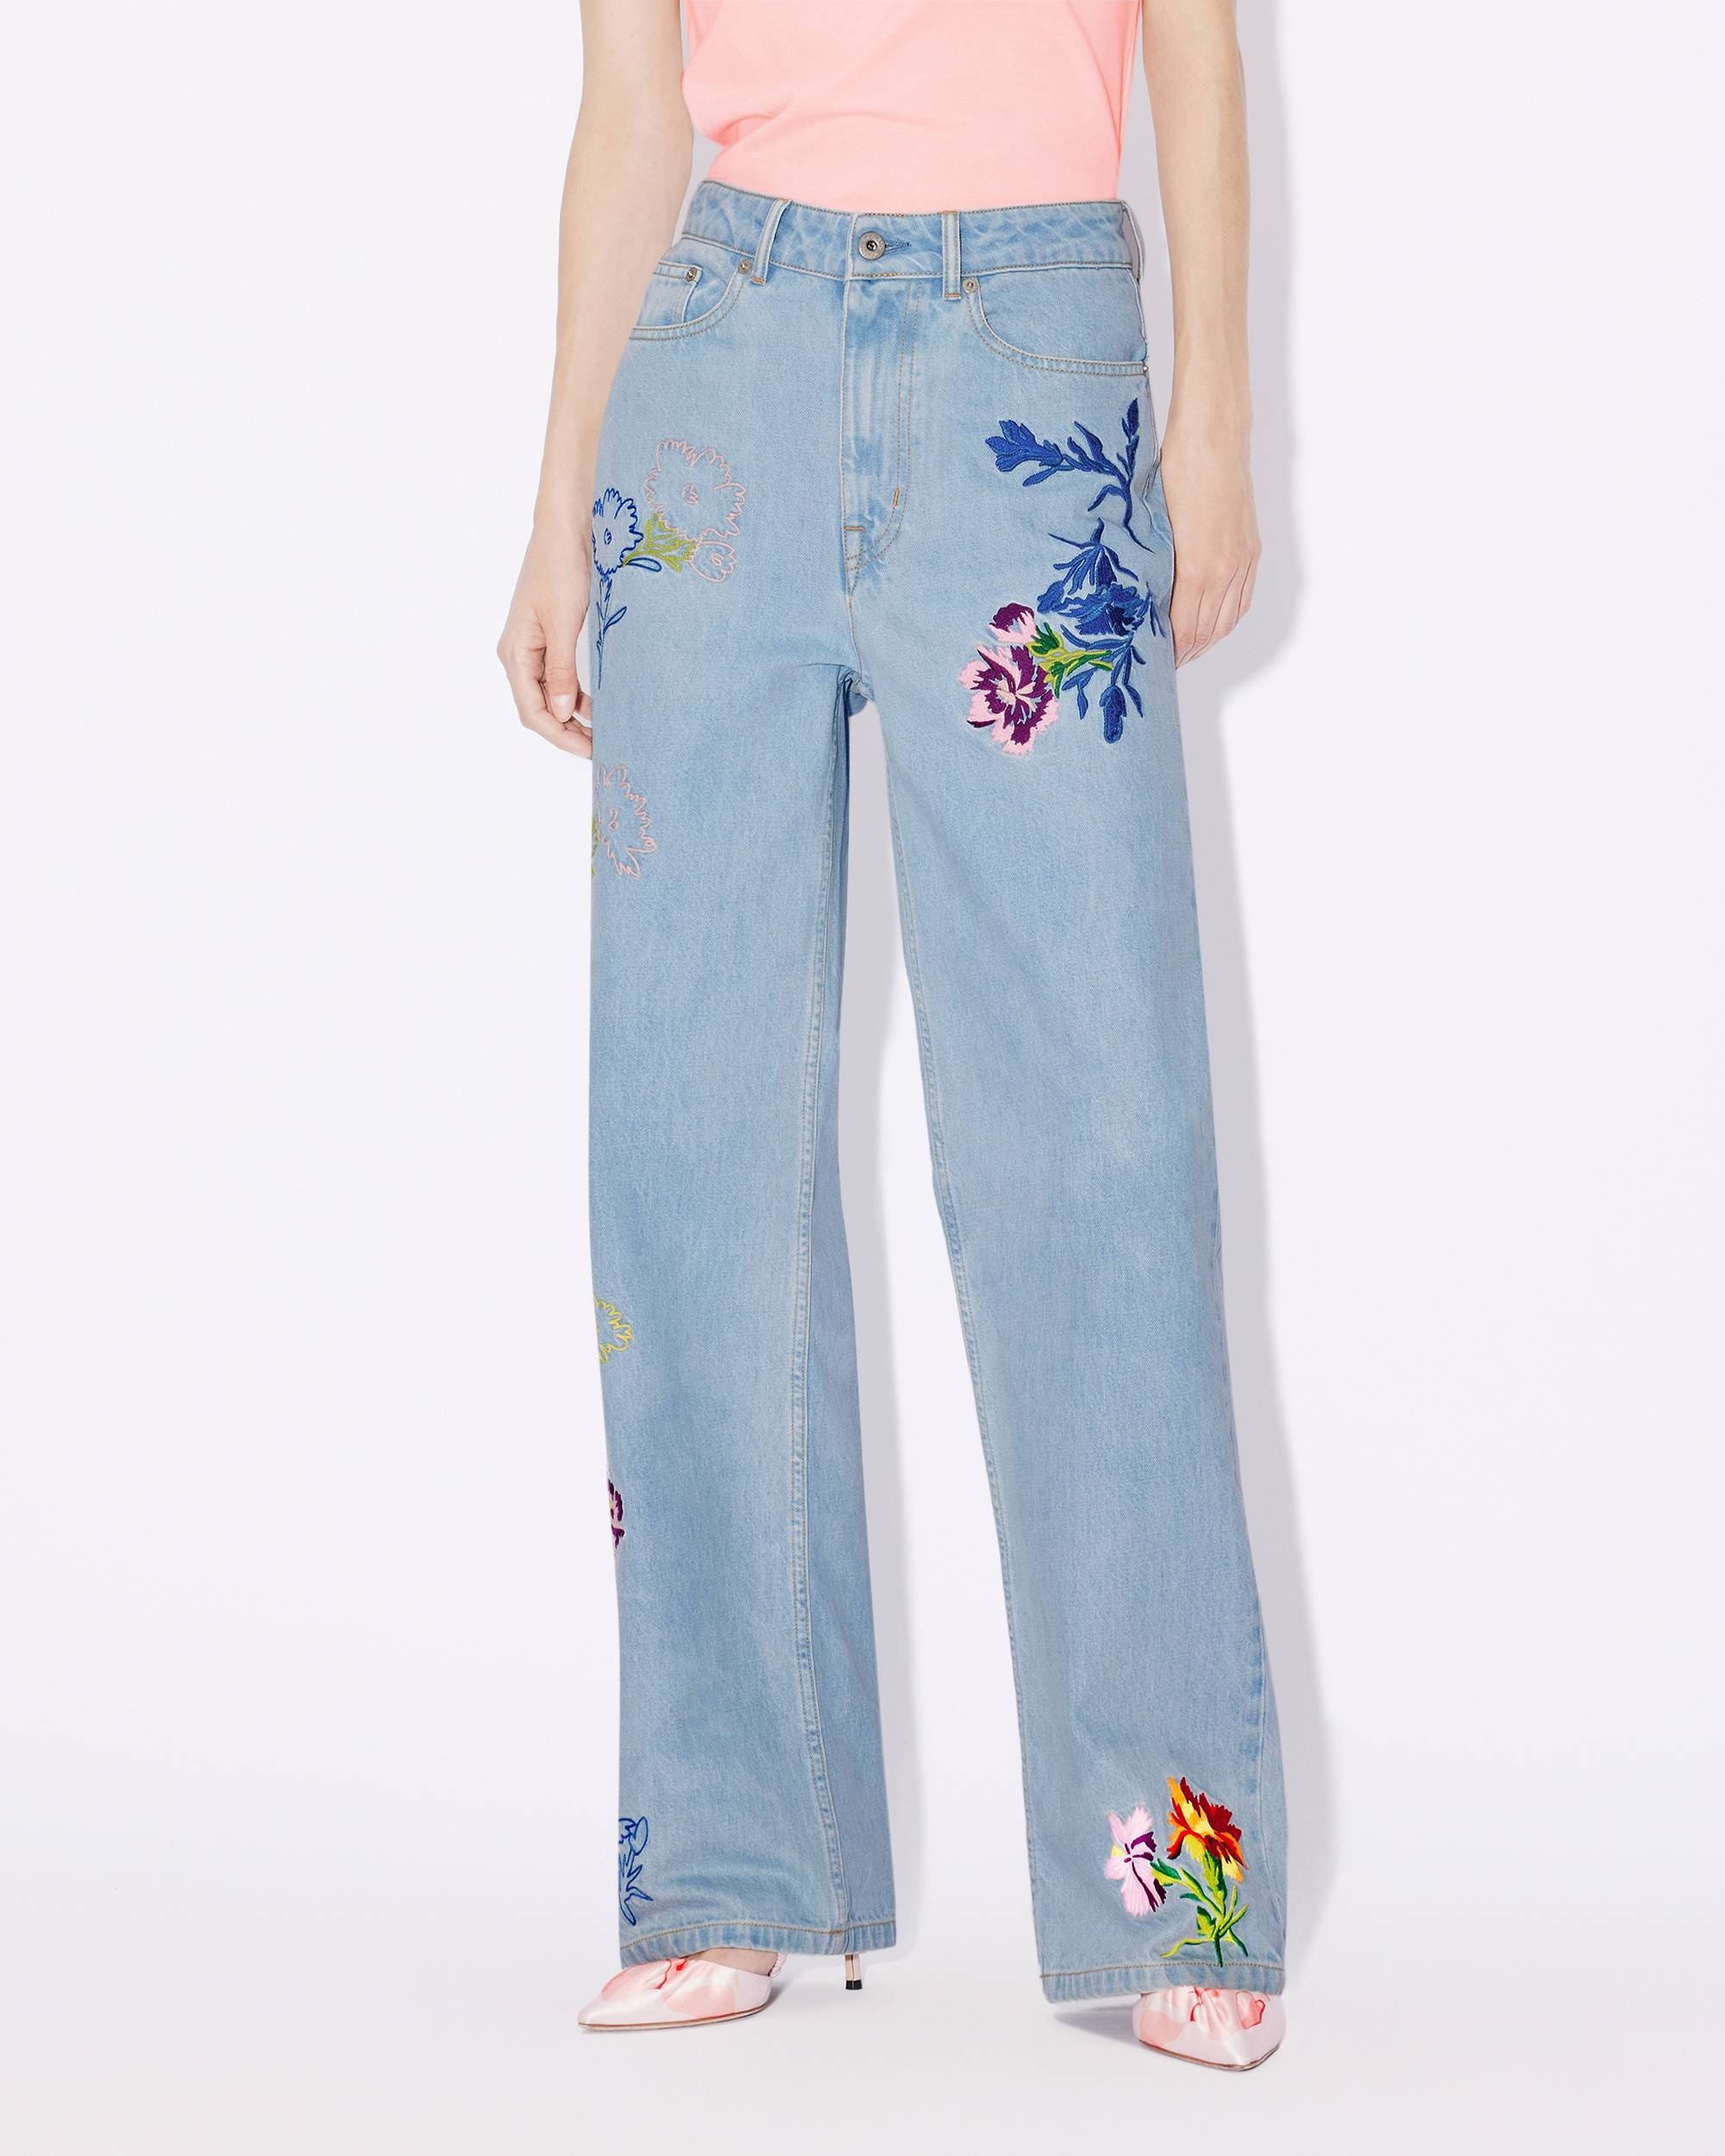 'KENZO Drawn Flowers' AYAME embroidered jeans - 4